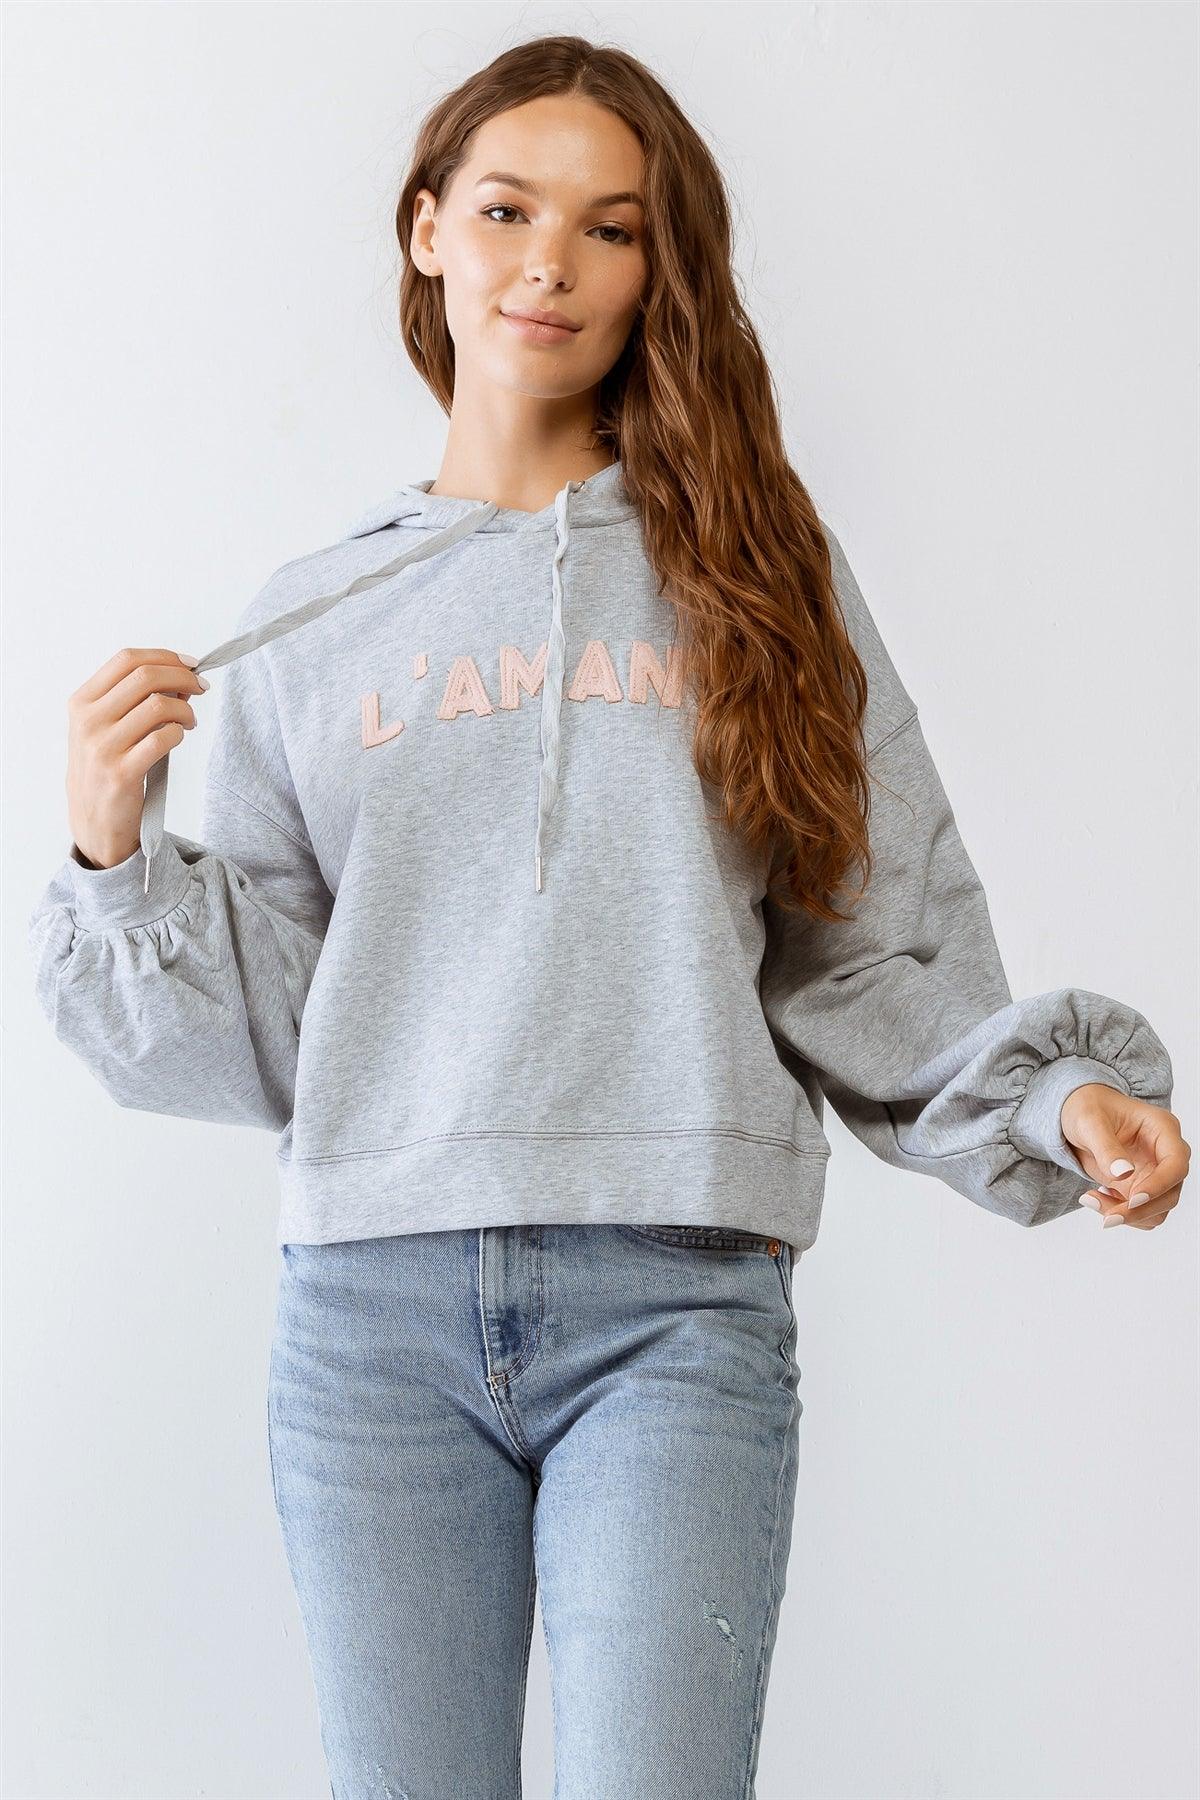 Heater Grey "L'AMANT" Print Long Sleeve Hooded Sweater /1-2-2-1